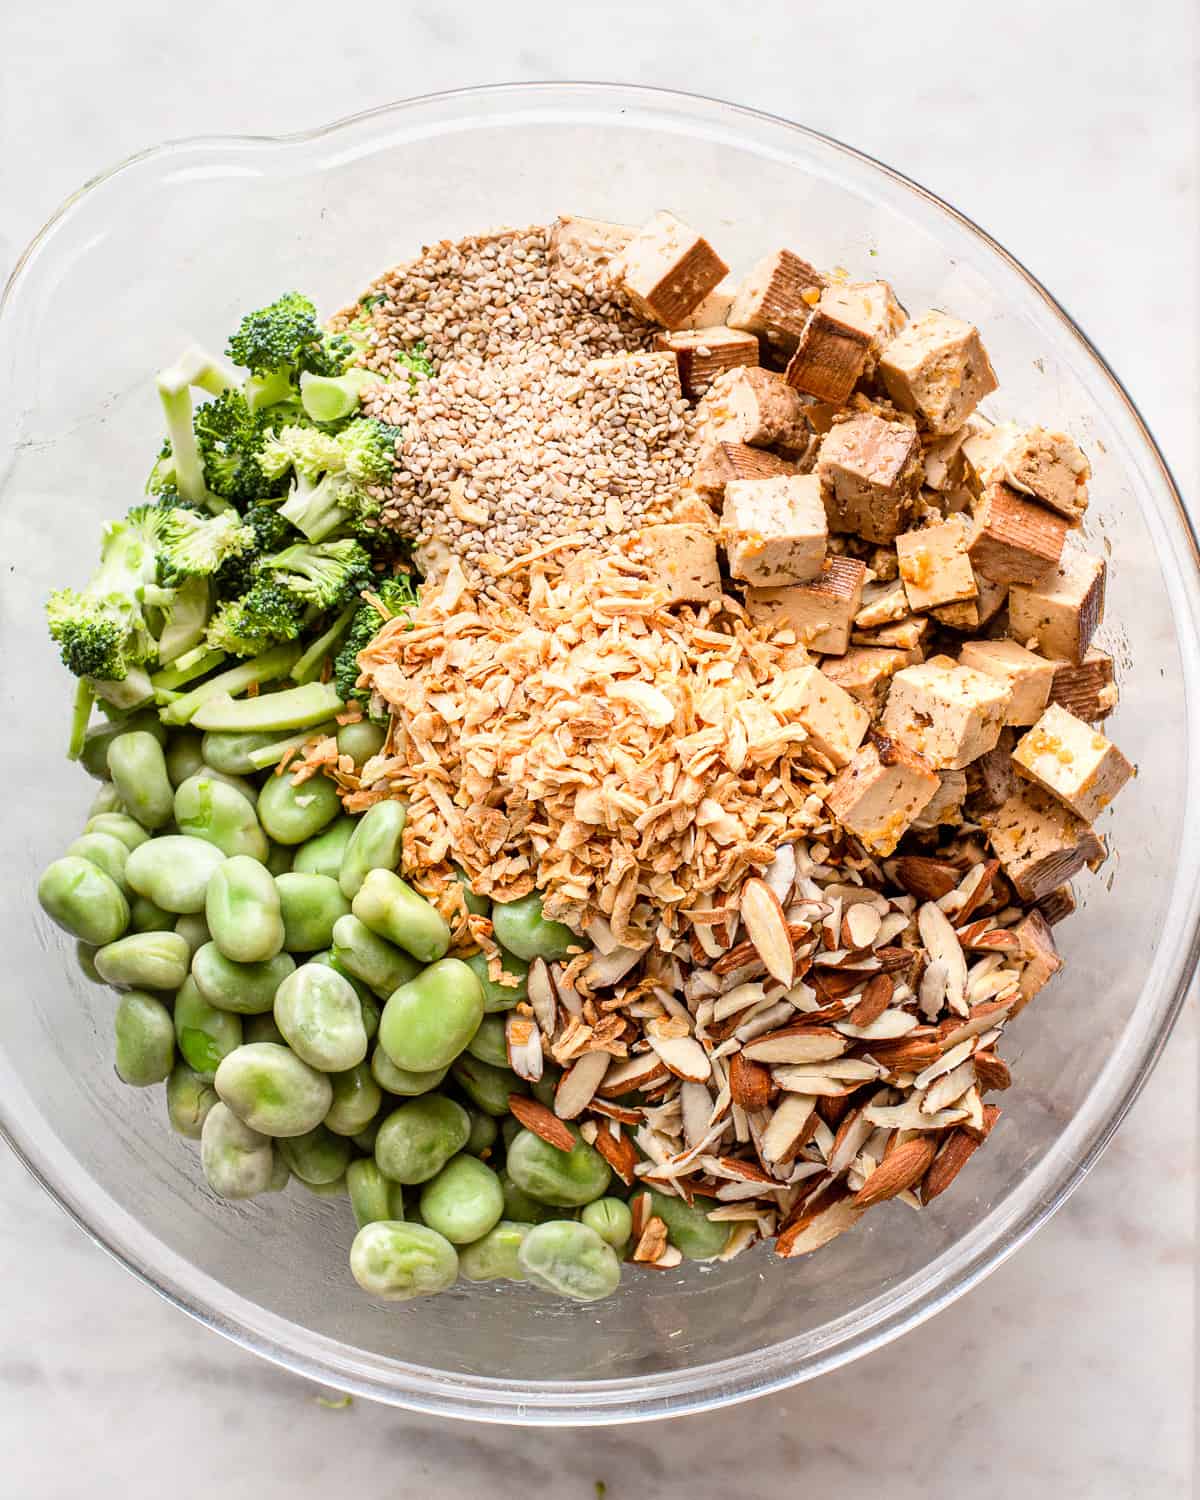 Ingredients for a broccoli, tofu, and edamame bean salad in a large glass bowl.